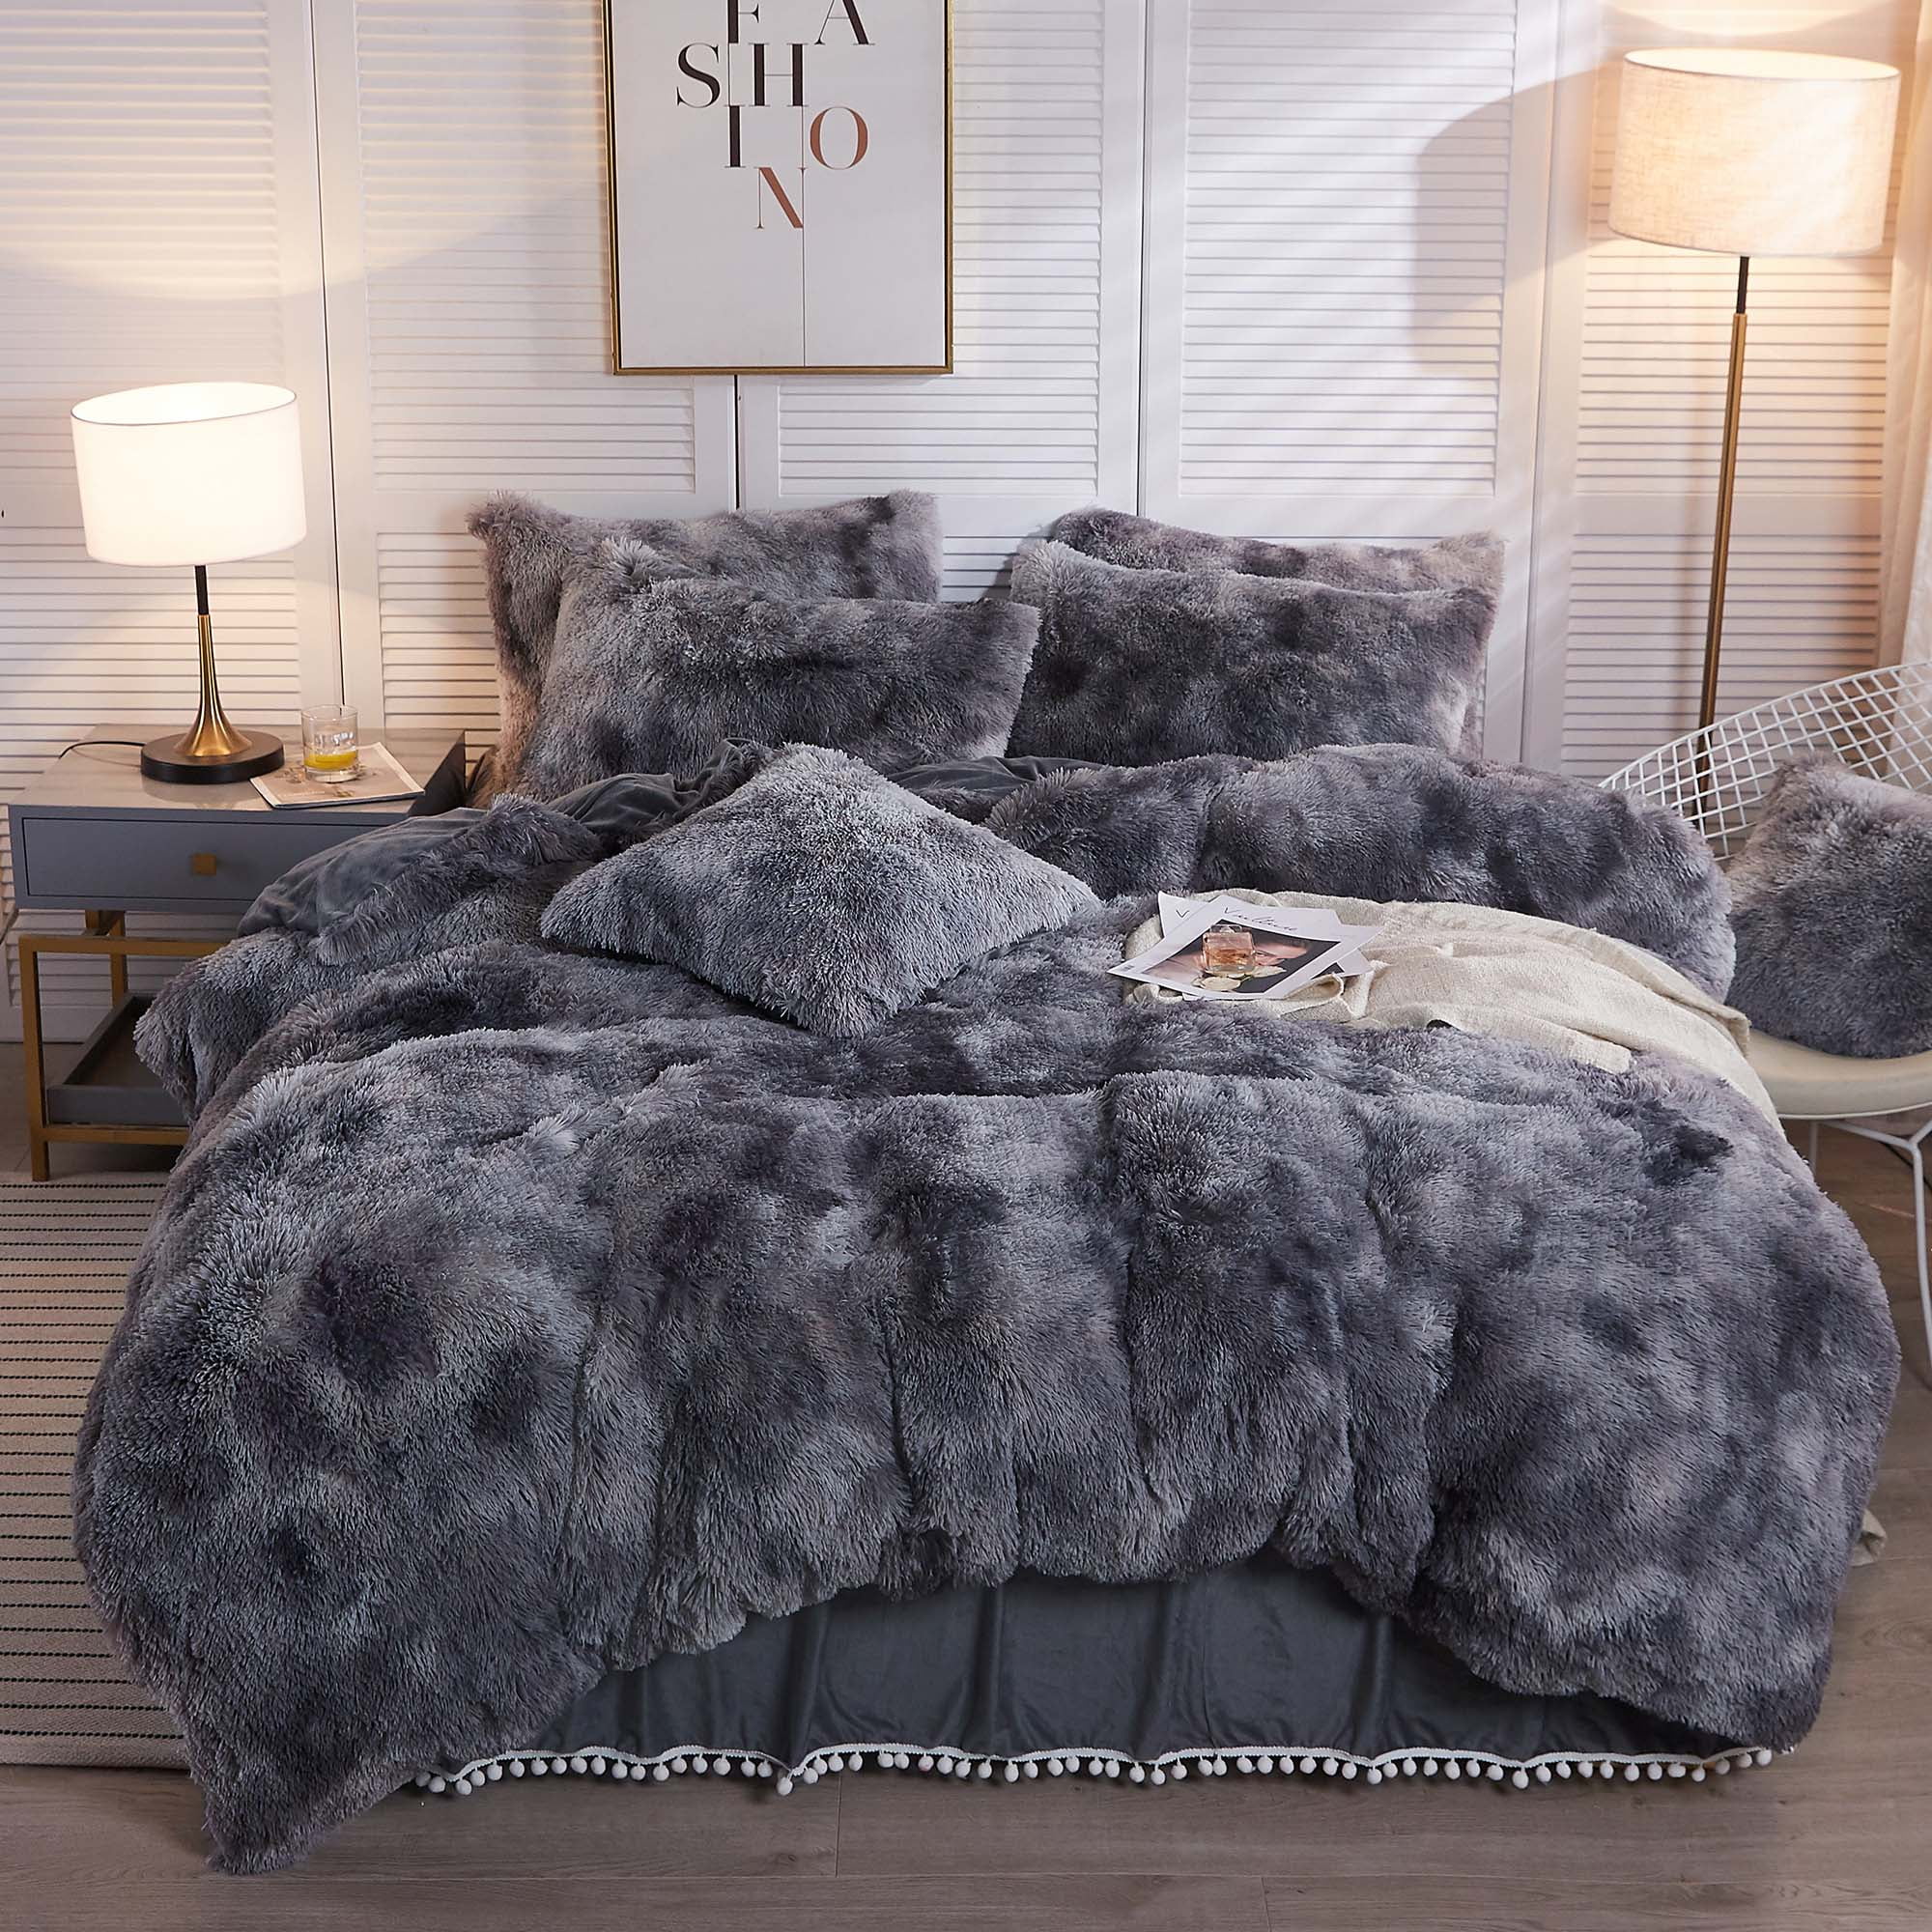 King, Charcoal EDS Teddy Fleece Luxury Duvet Cover Sets Thermal Warm & Super Soft Cozy Fluffy with Matching Pillow Case 